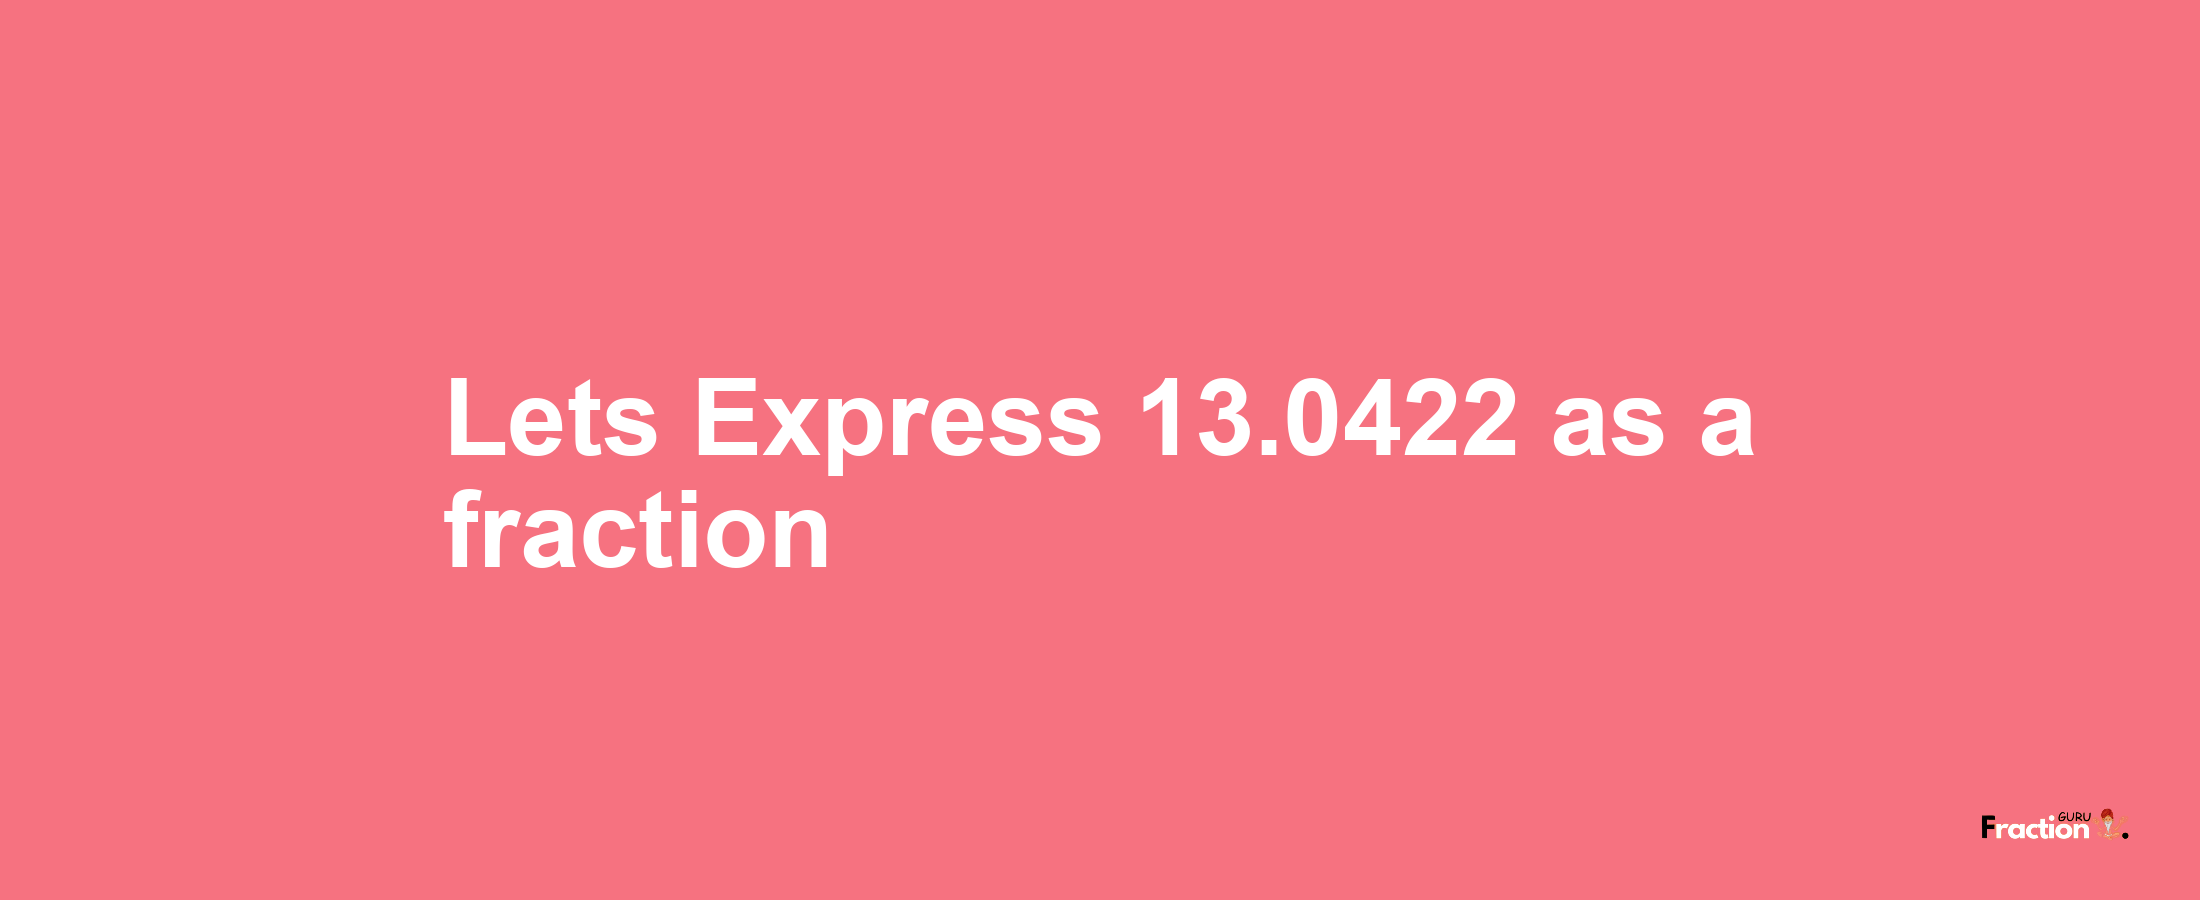 Lets Express 13.0422 as afraction